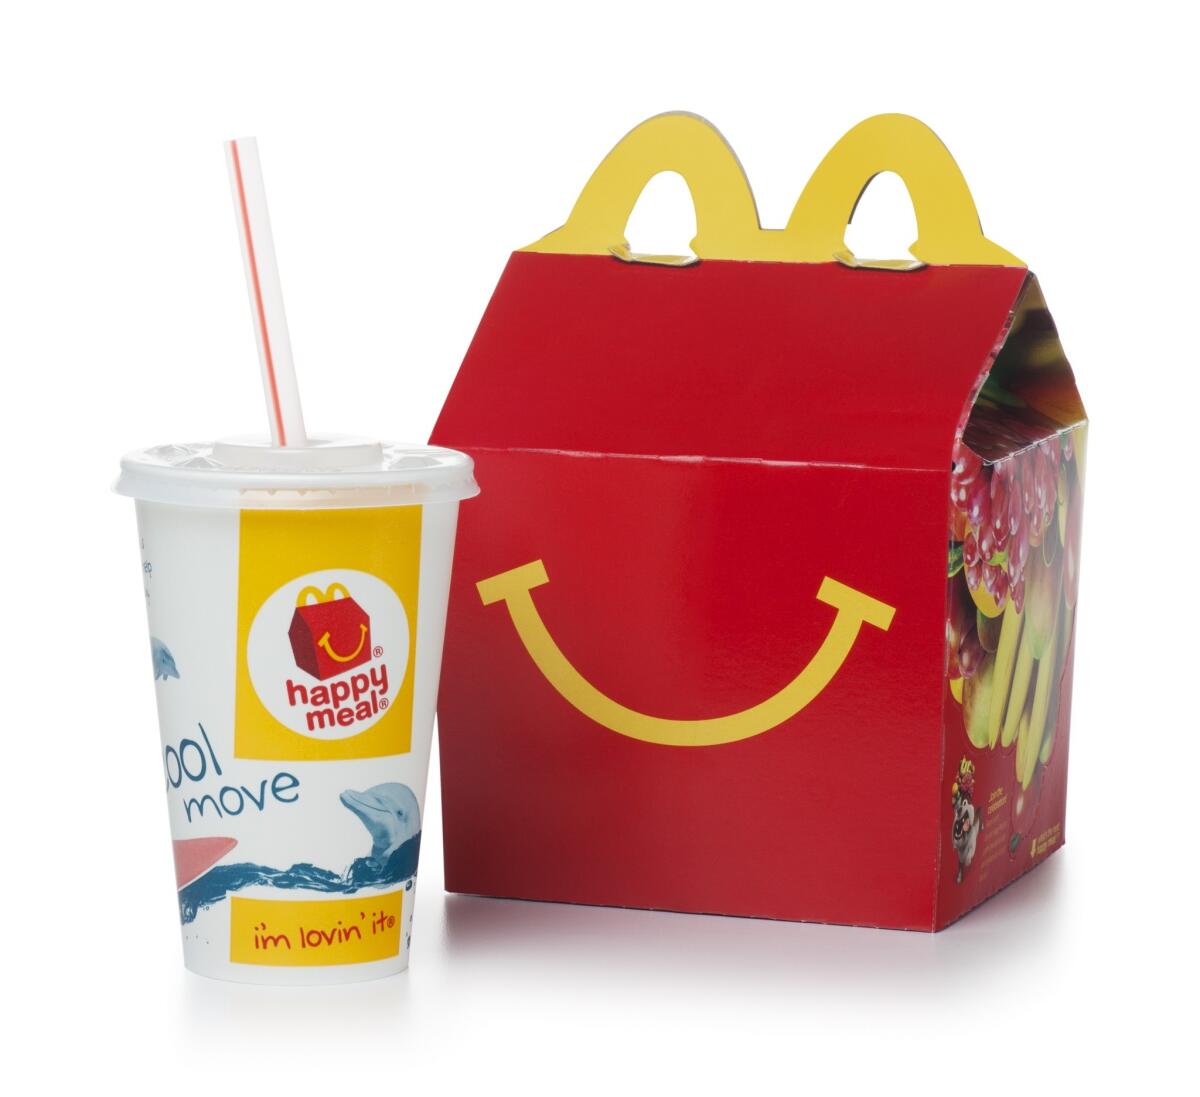 San Diego, California, United States - April 13th 2011: This is a photo taken in the studio on a white background of a McDonalds Happy Meal. It has often been brought in to question if fast food chains are to blame for obesity in America.